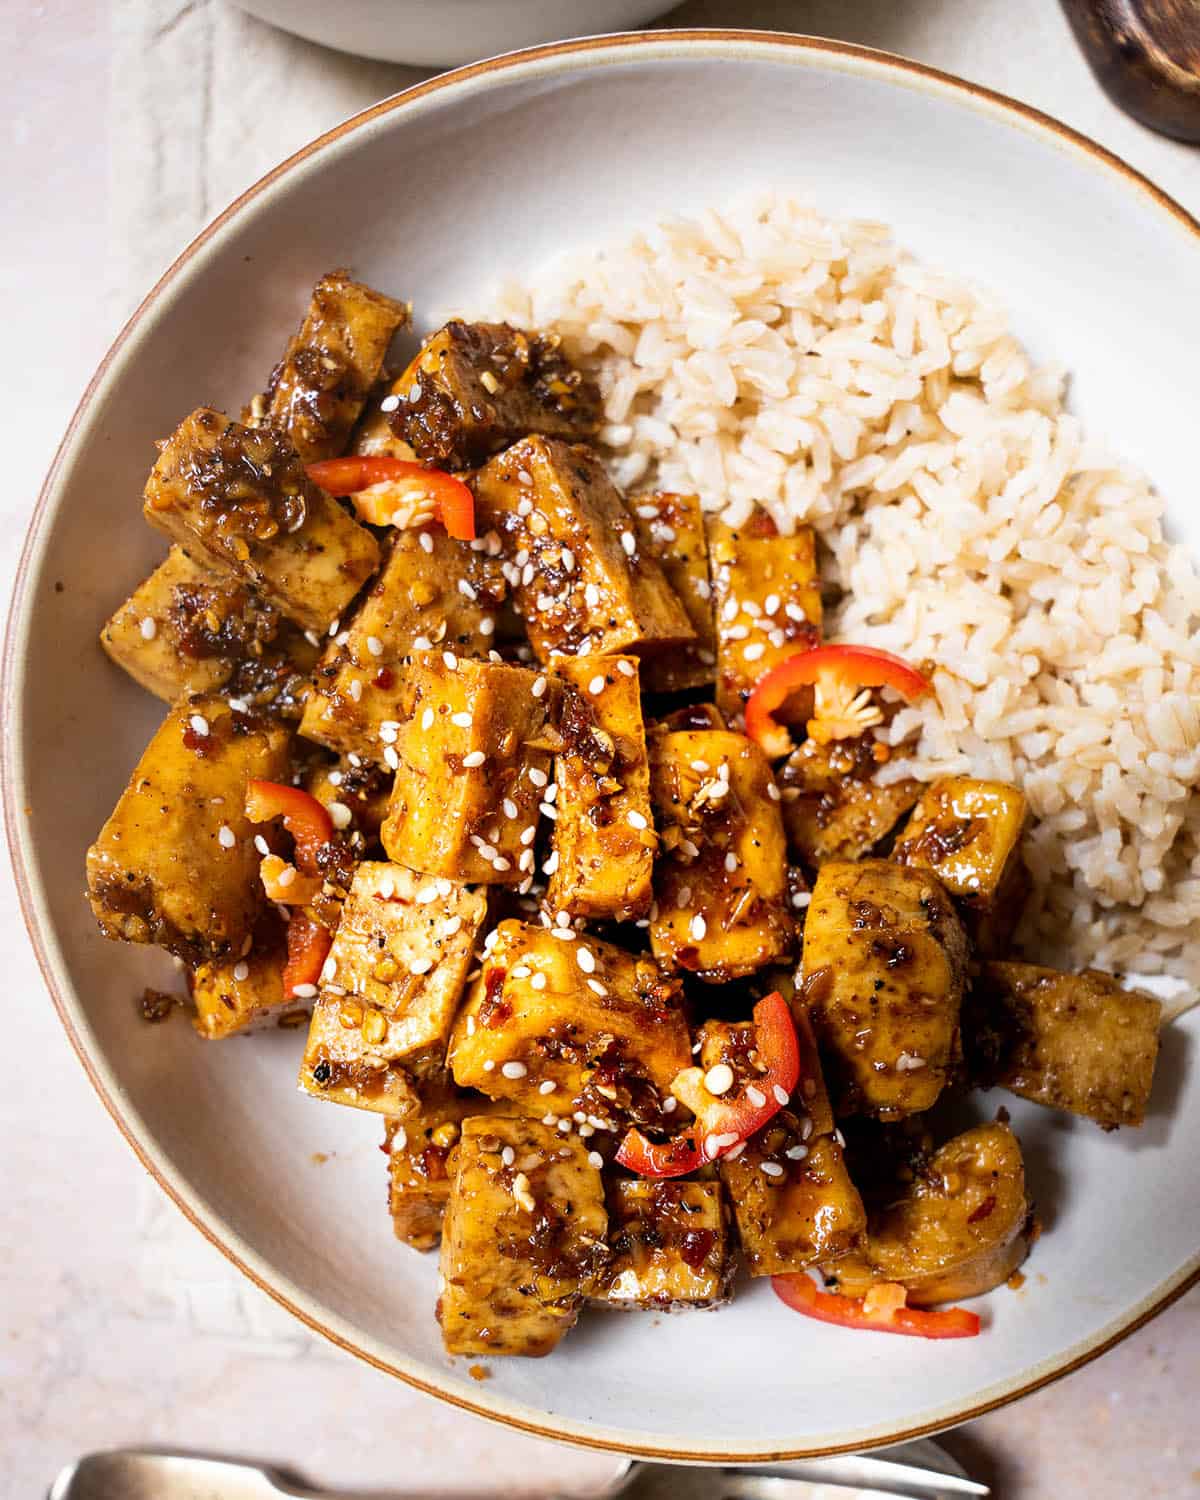 Szechuan tofu in a bowl topped with sesame seeds, served with brown rice.